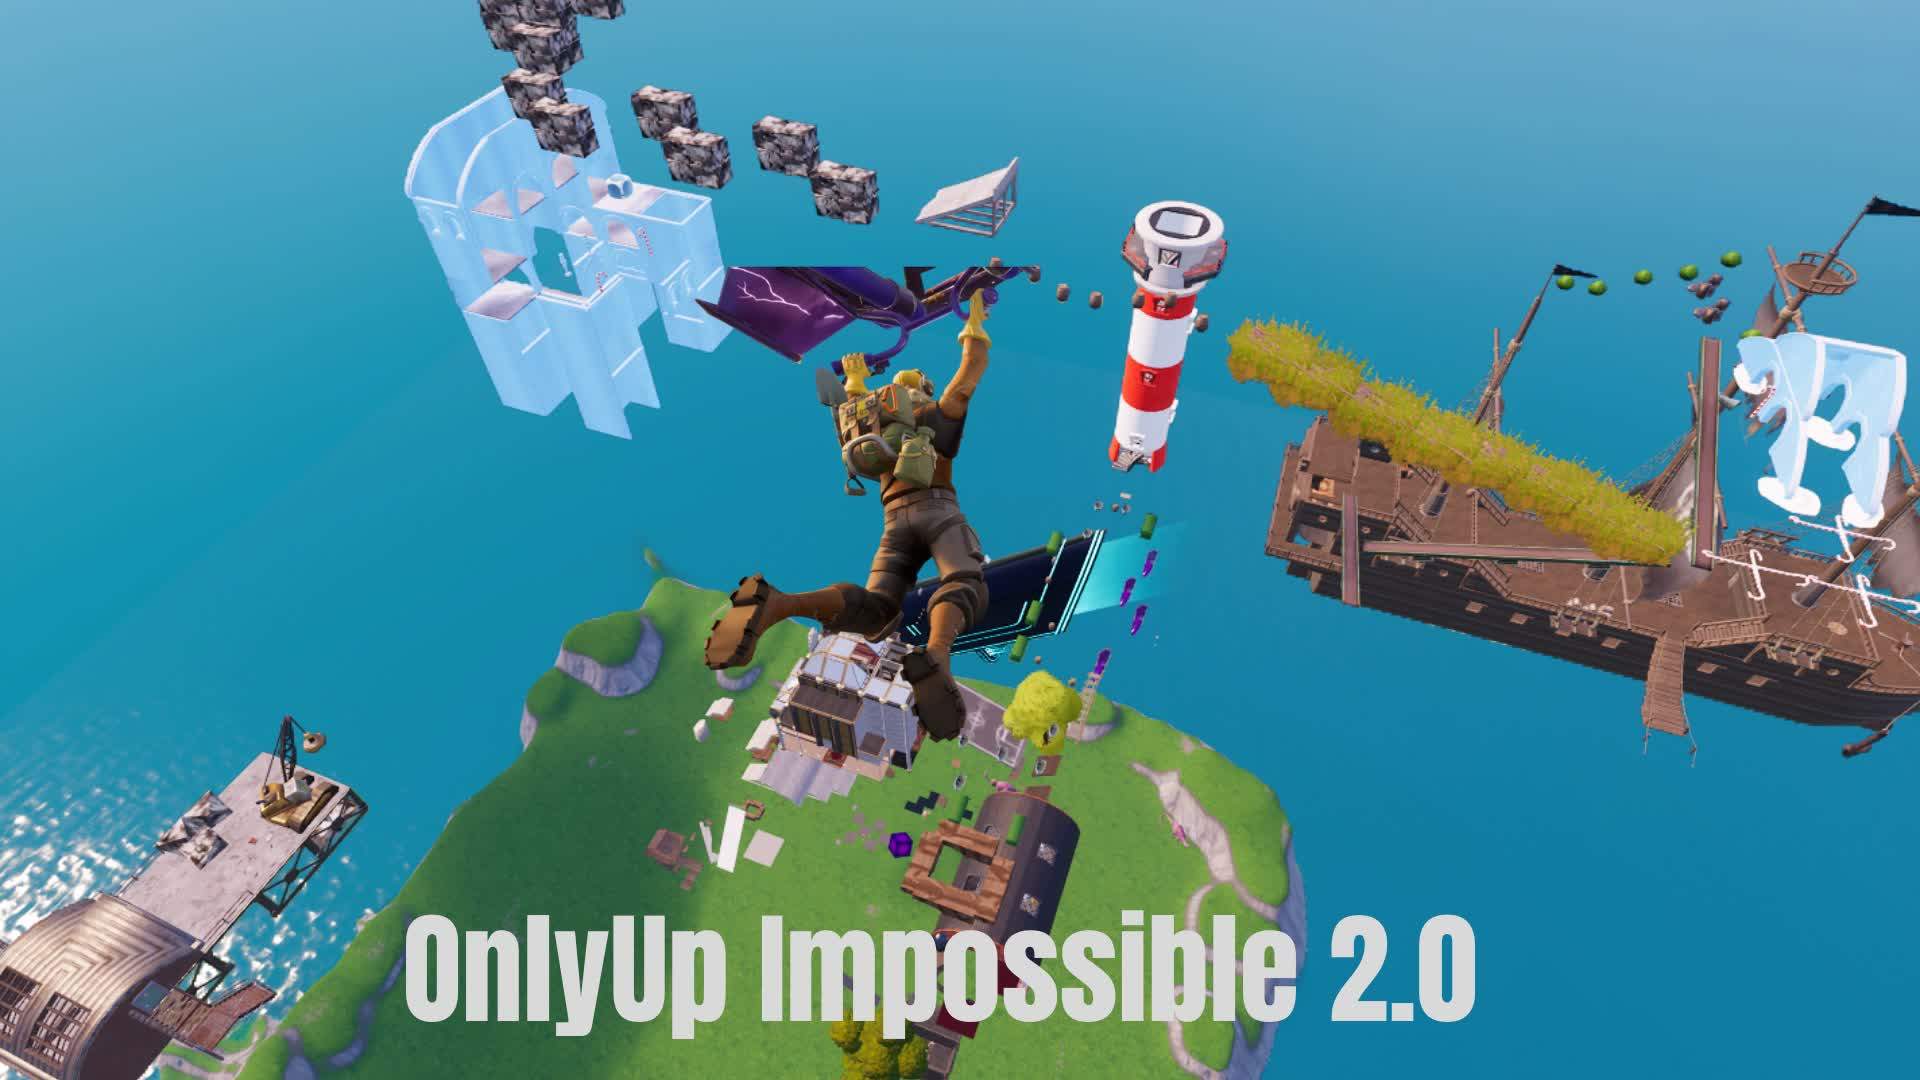 OnlyUp Impossible 2.0